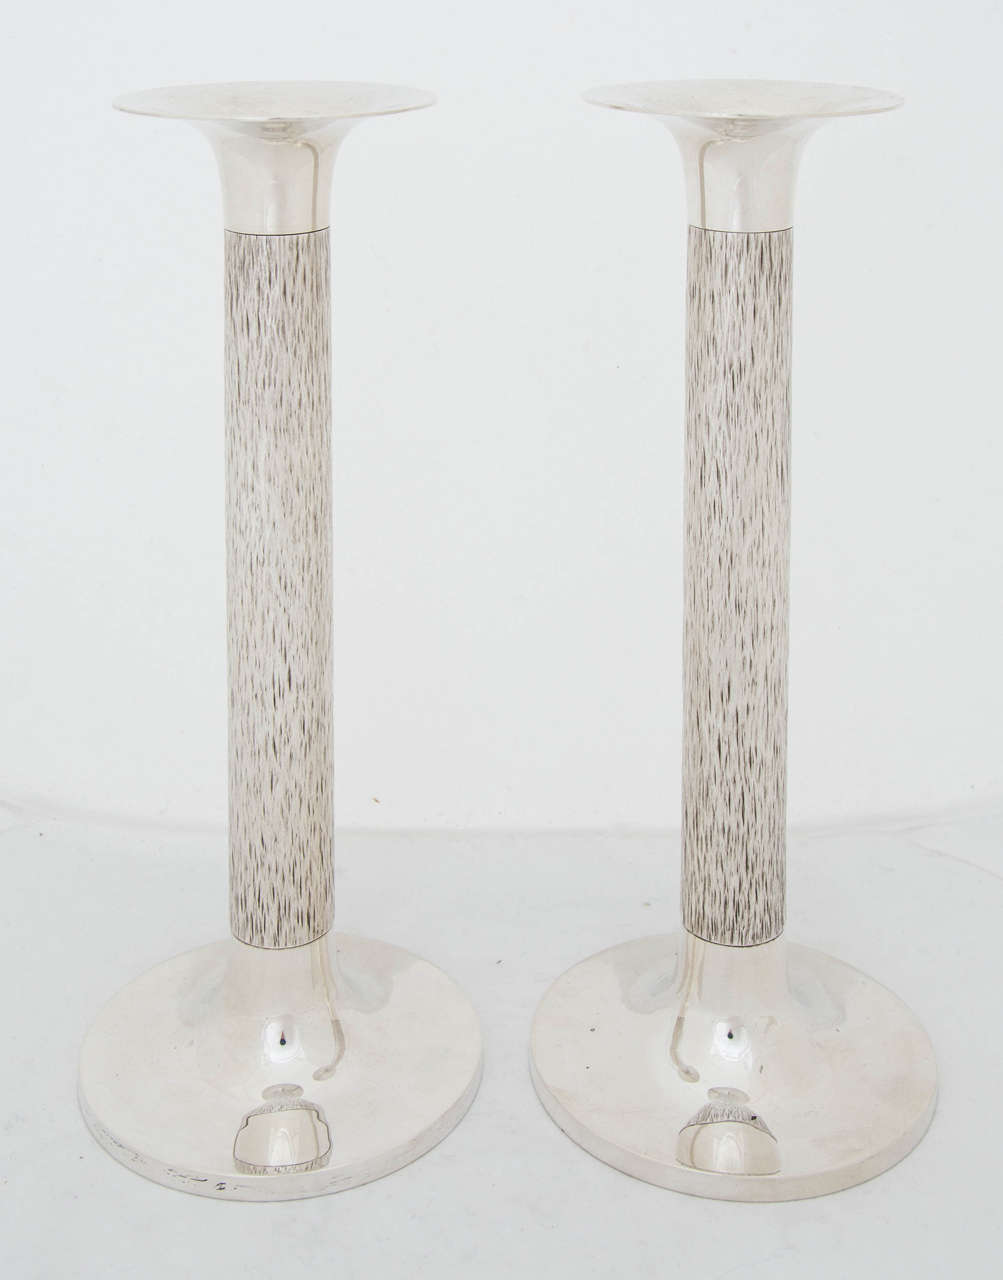 A pair of sterling silver candlesticks made by the celebrated silversmith and designer Gerald Benney in London, 1969.
Height is 24.5cm.